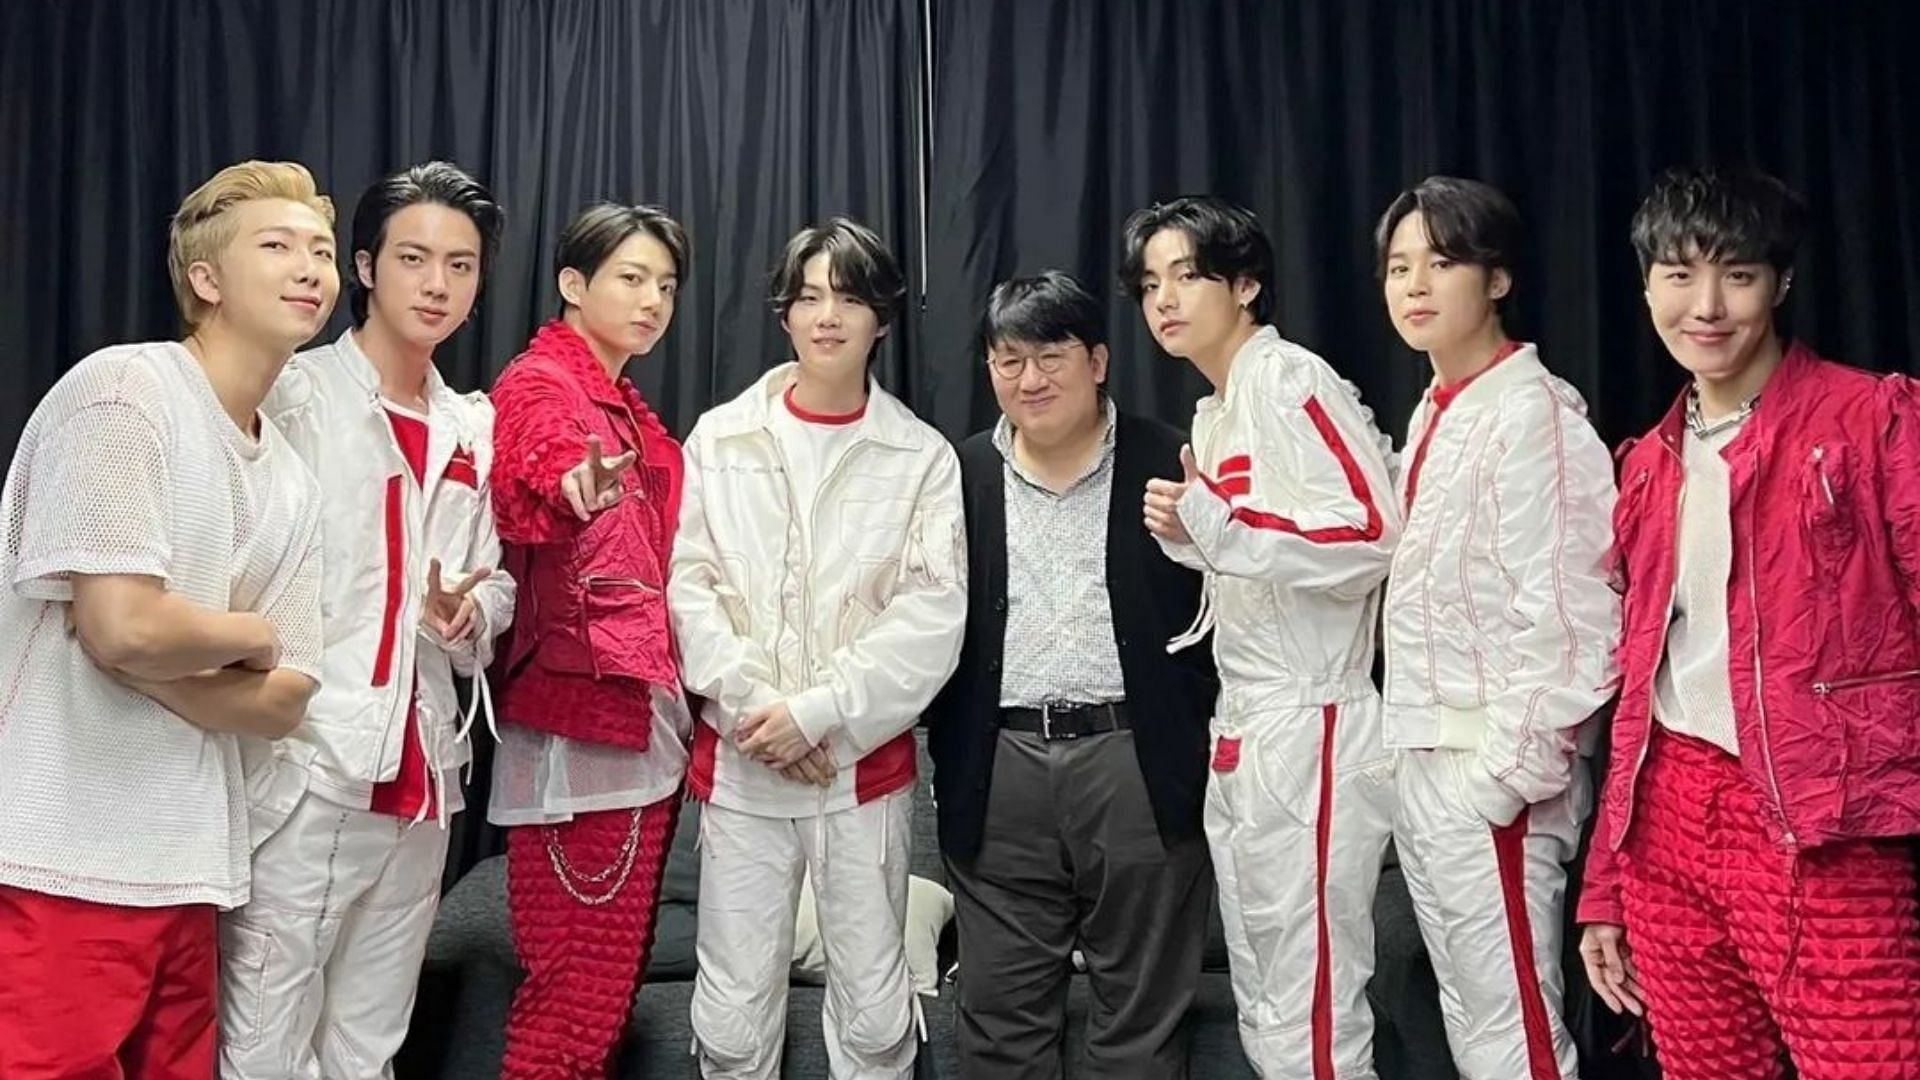 BTS with &quot;hitman&quot; Bang, founder of Big Hit Music and HYBE Corp post-Seoul concert (Image via @hitmanb72/Instagram)